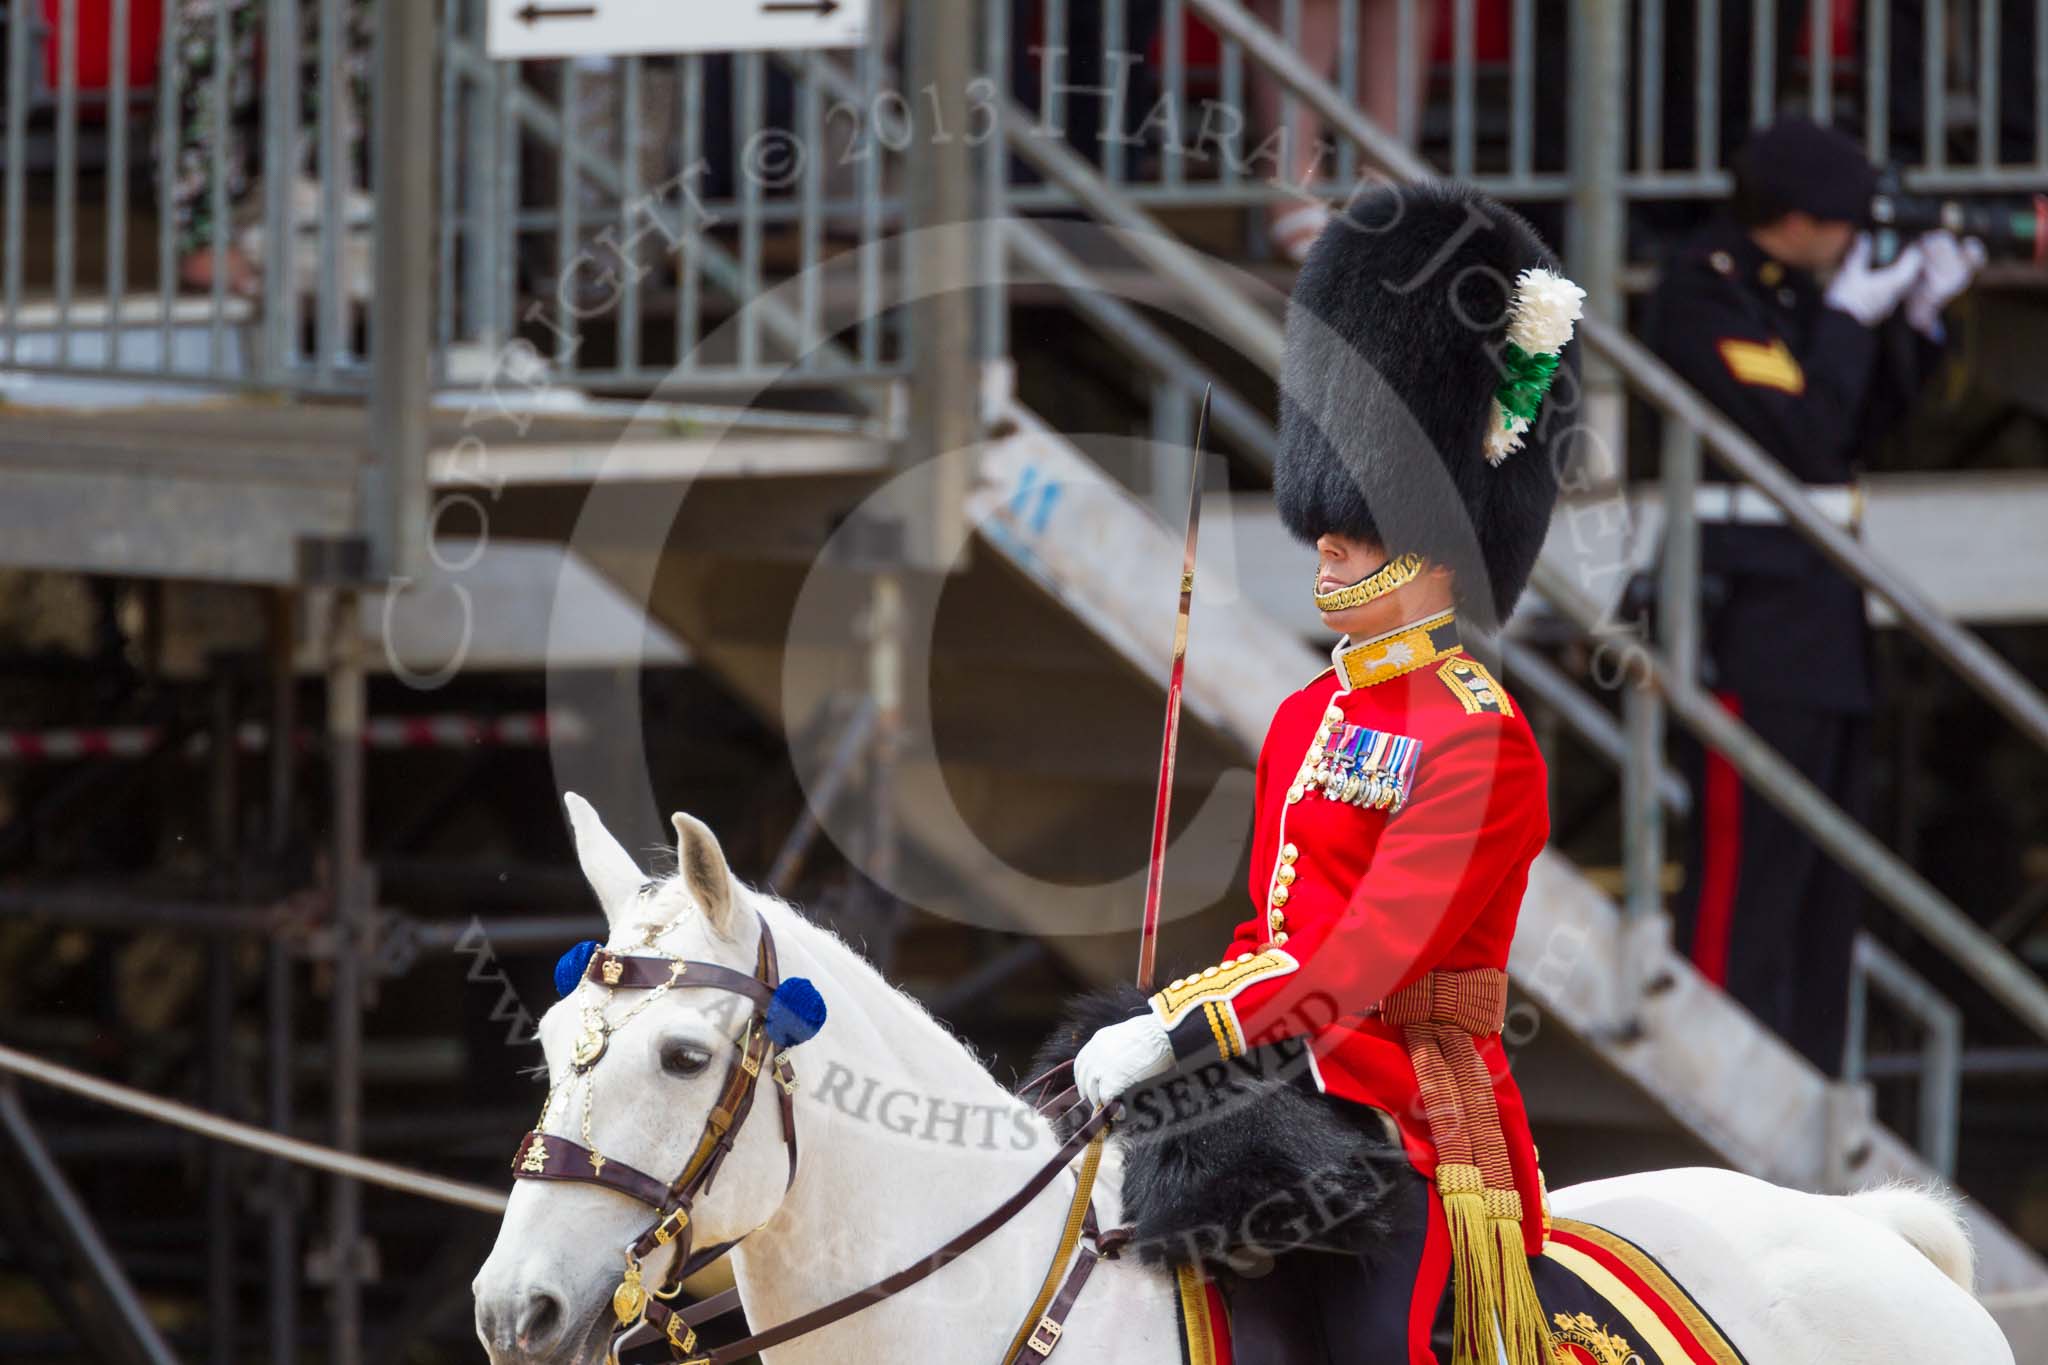 The Colonel's Review 2015.
Horse Guards Parade, Westminster,
London,

United Kingdom,
on 06 June 2015 at 11:31, image #358